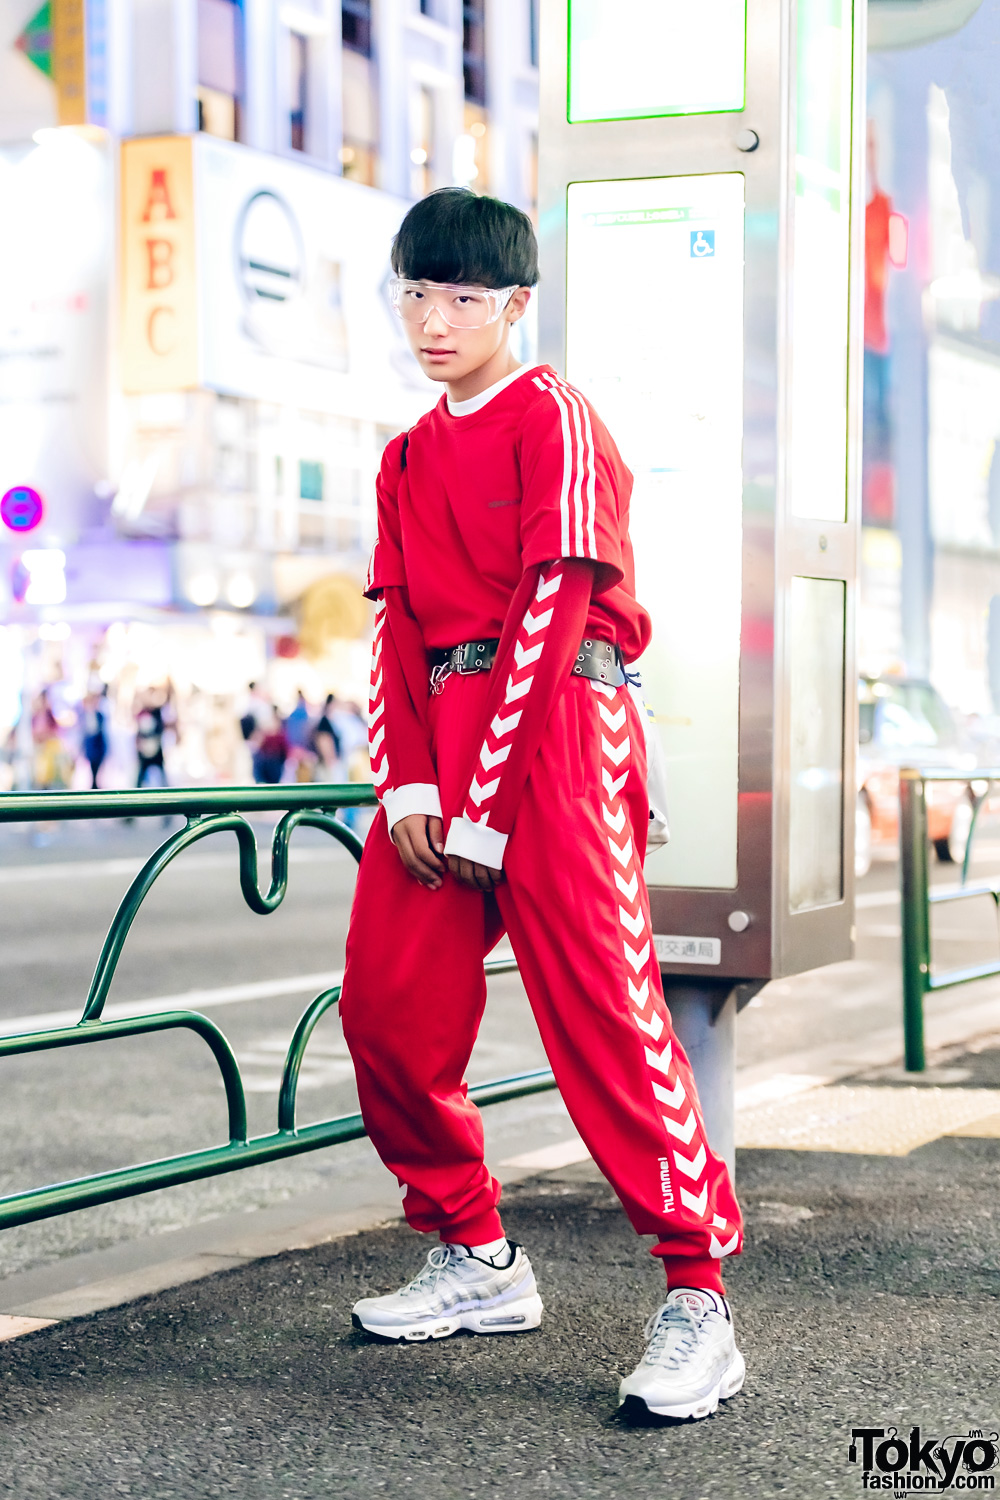 Harajuku Guy in Red-and-White Sporty Street Style